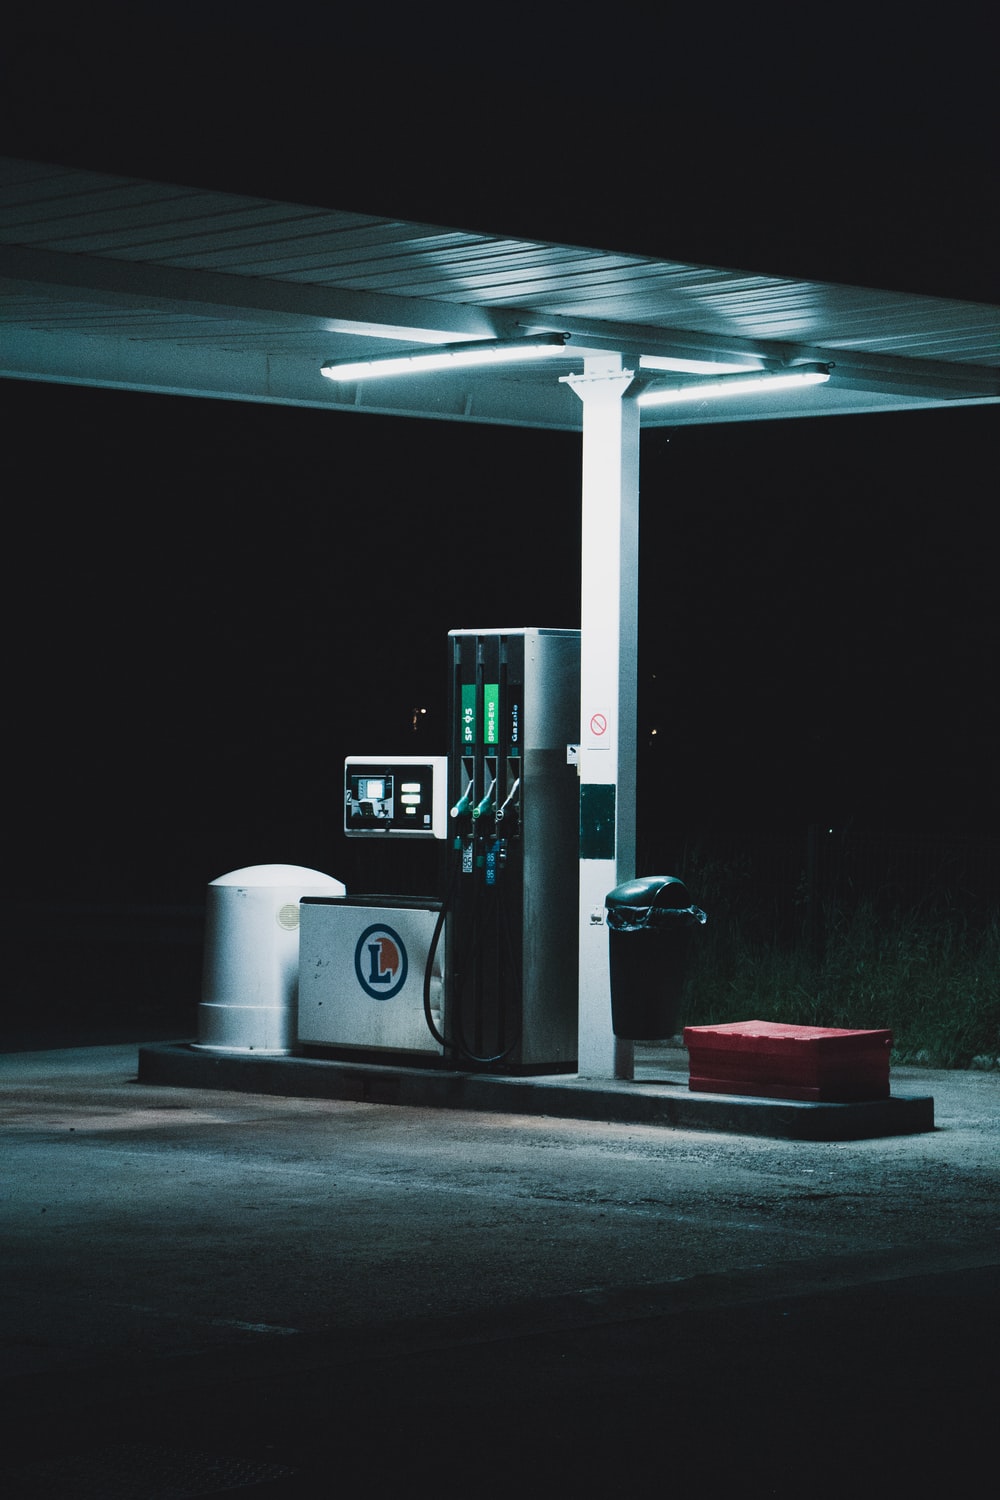 Fuel Station Picture. Download Free Image